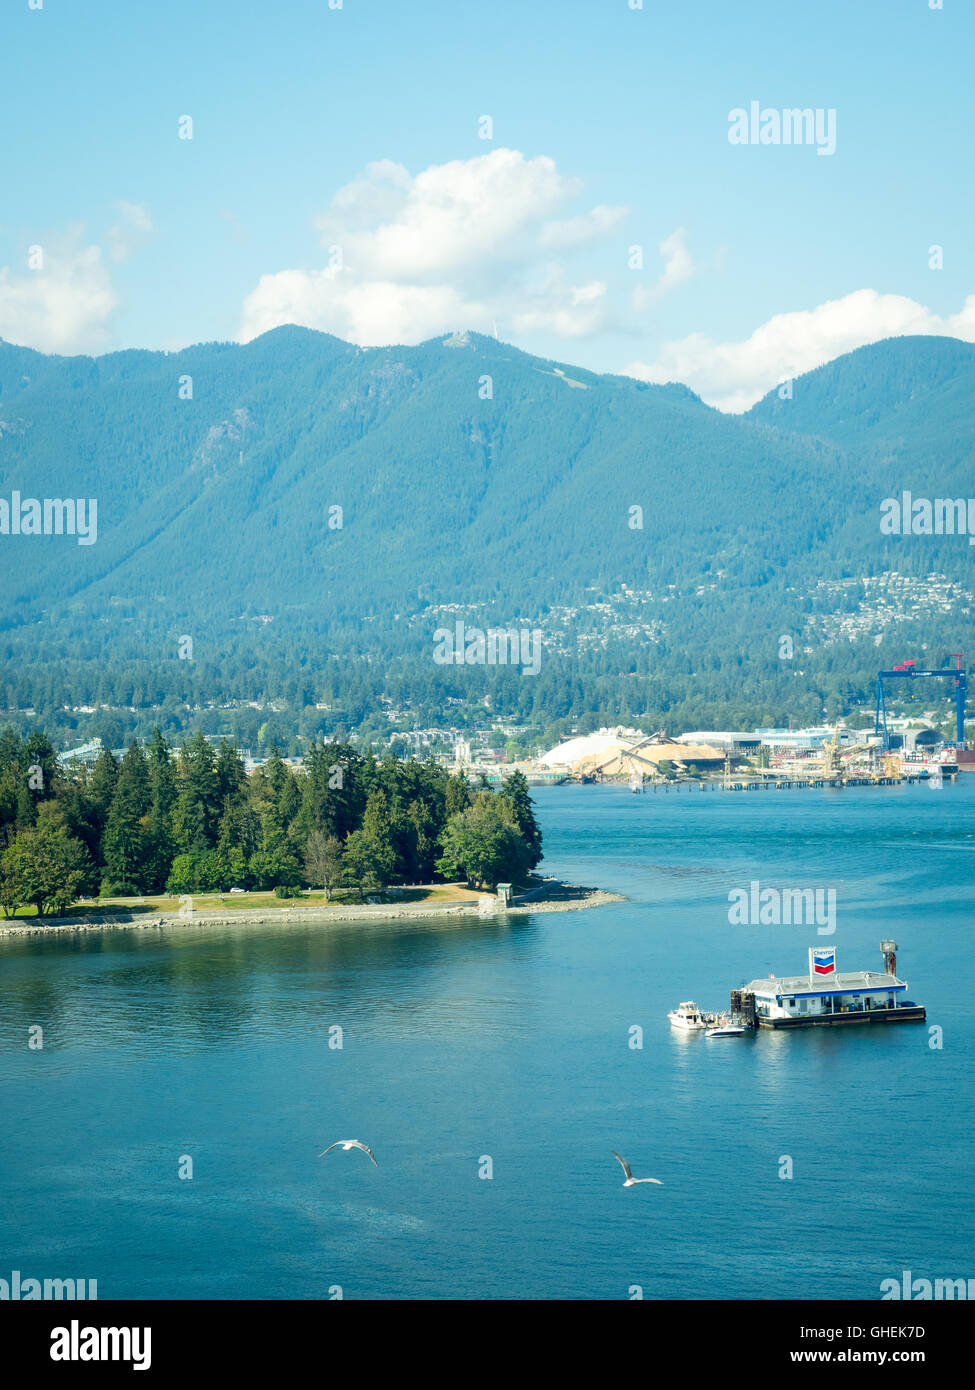 Elevated view: Coal Harbour, the floating Chevron fuel station, Stanley Park, Vancouver Harbour, and Grouse Mountain. Vancouver. Stock Photo